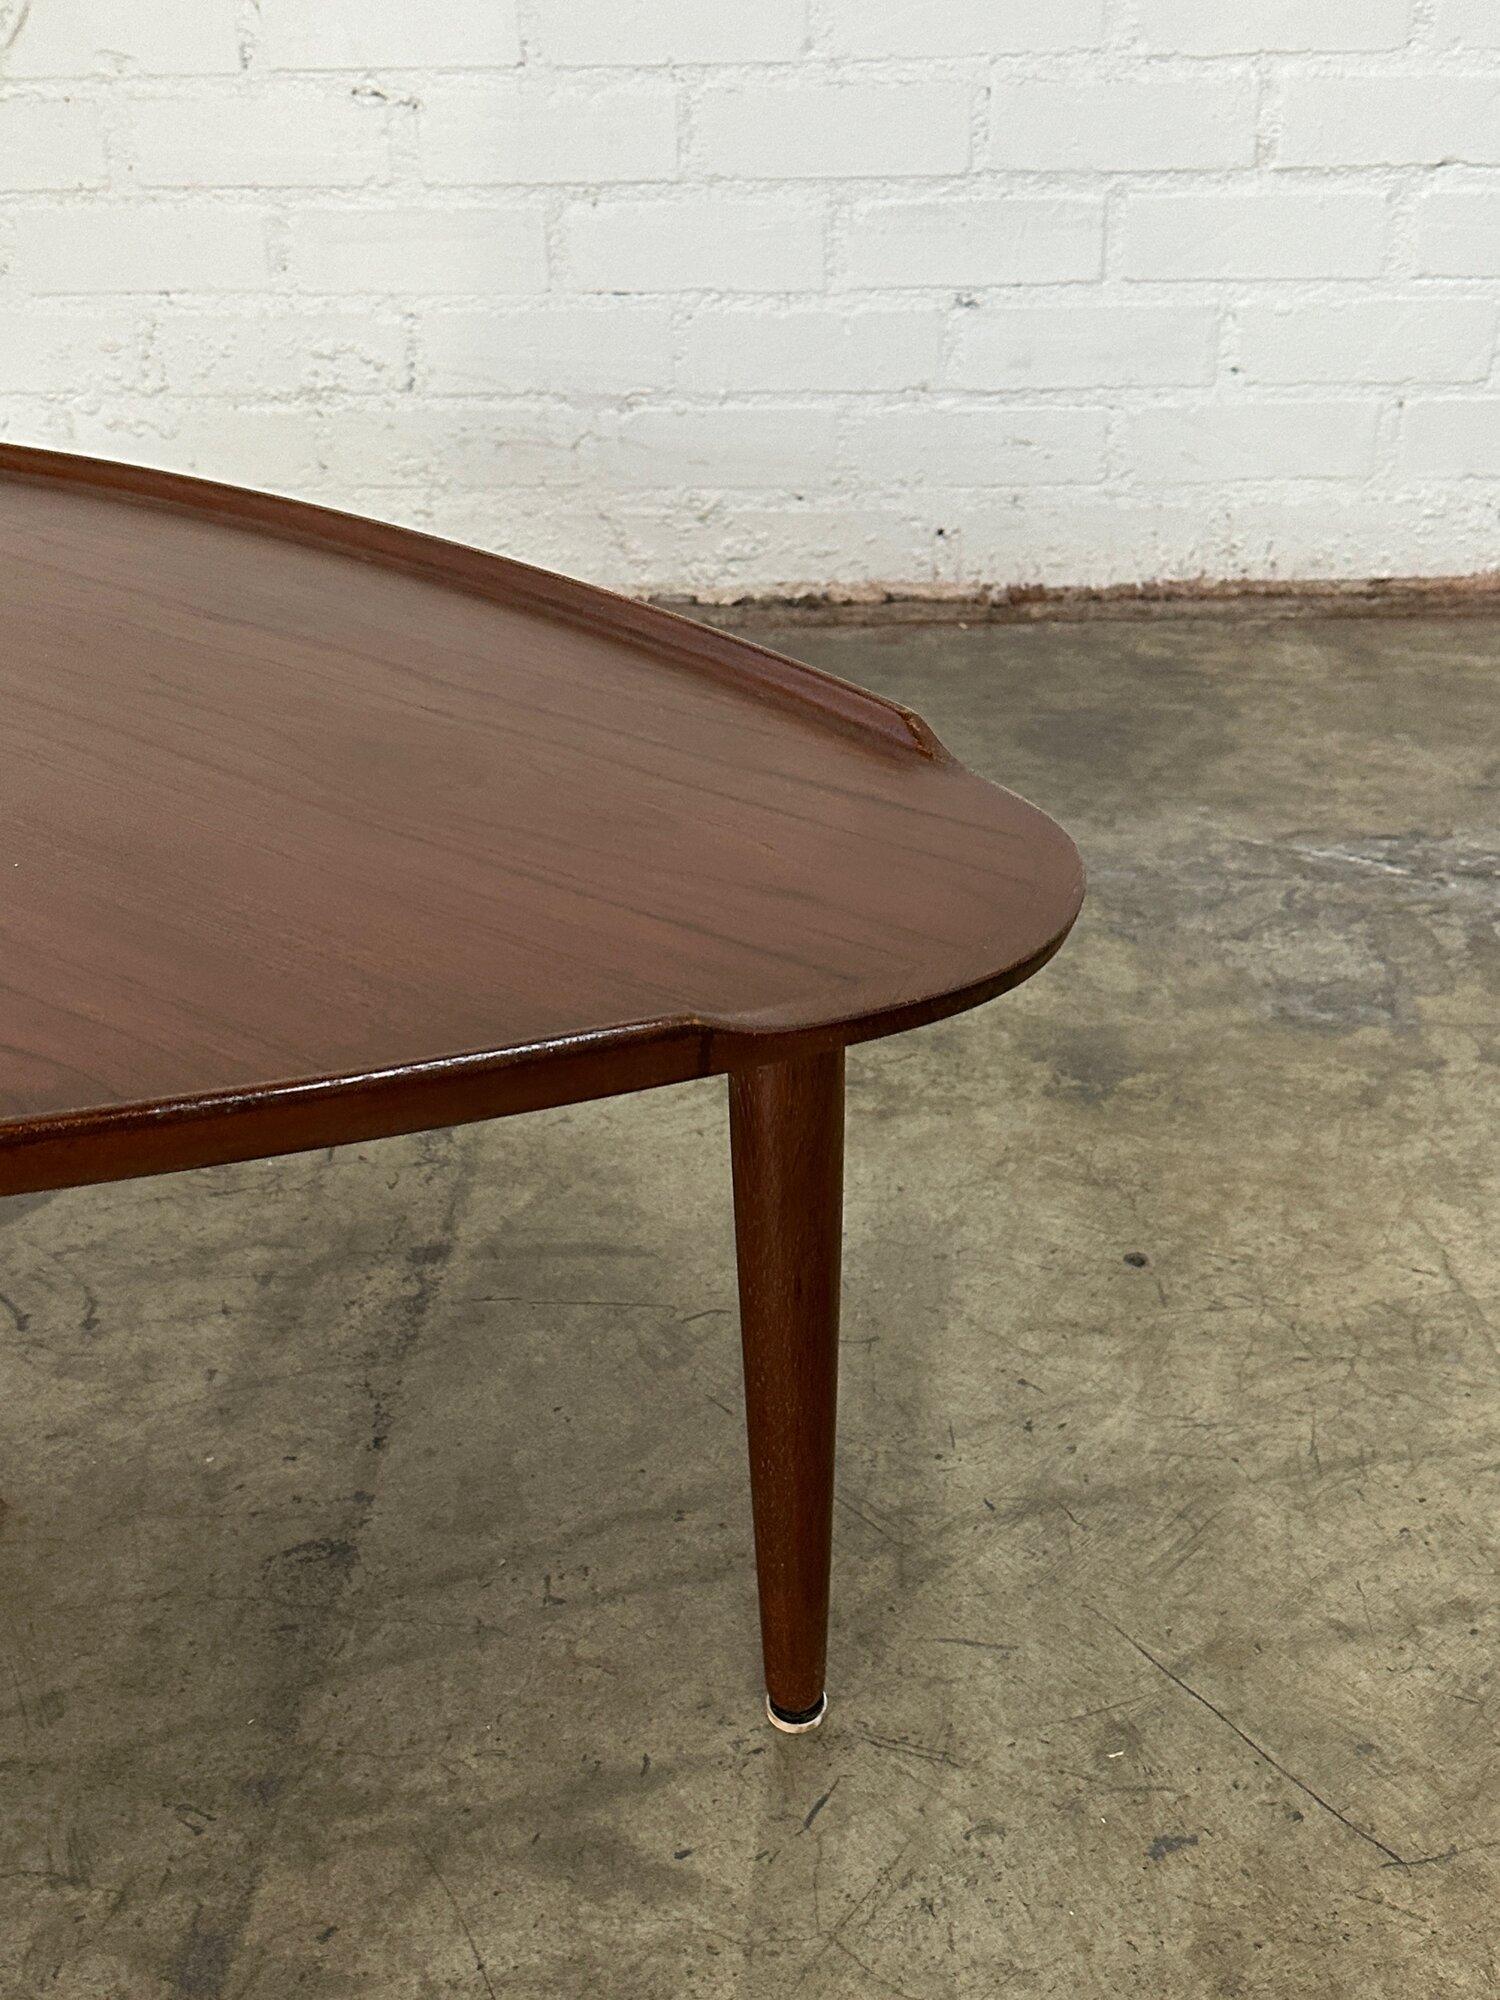 Teak Danish Modern Coffee Table In Good Condition For Sale In Los Angeles, CA